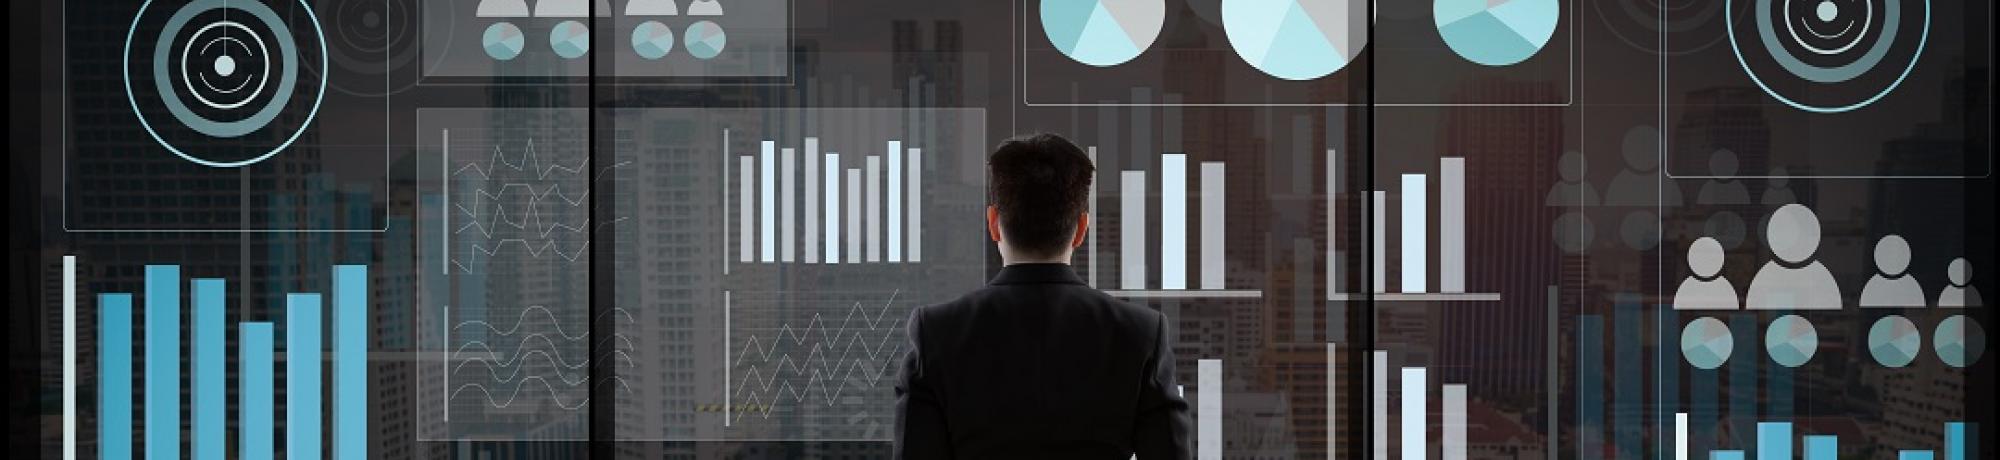 Guy standing in front of Business Analysis Graphs